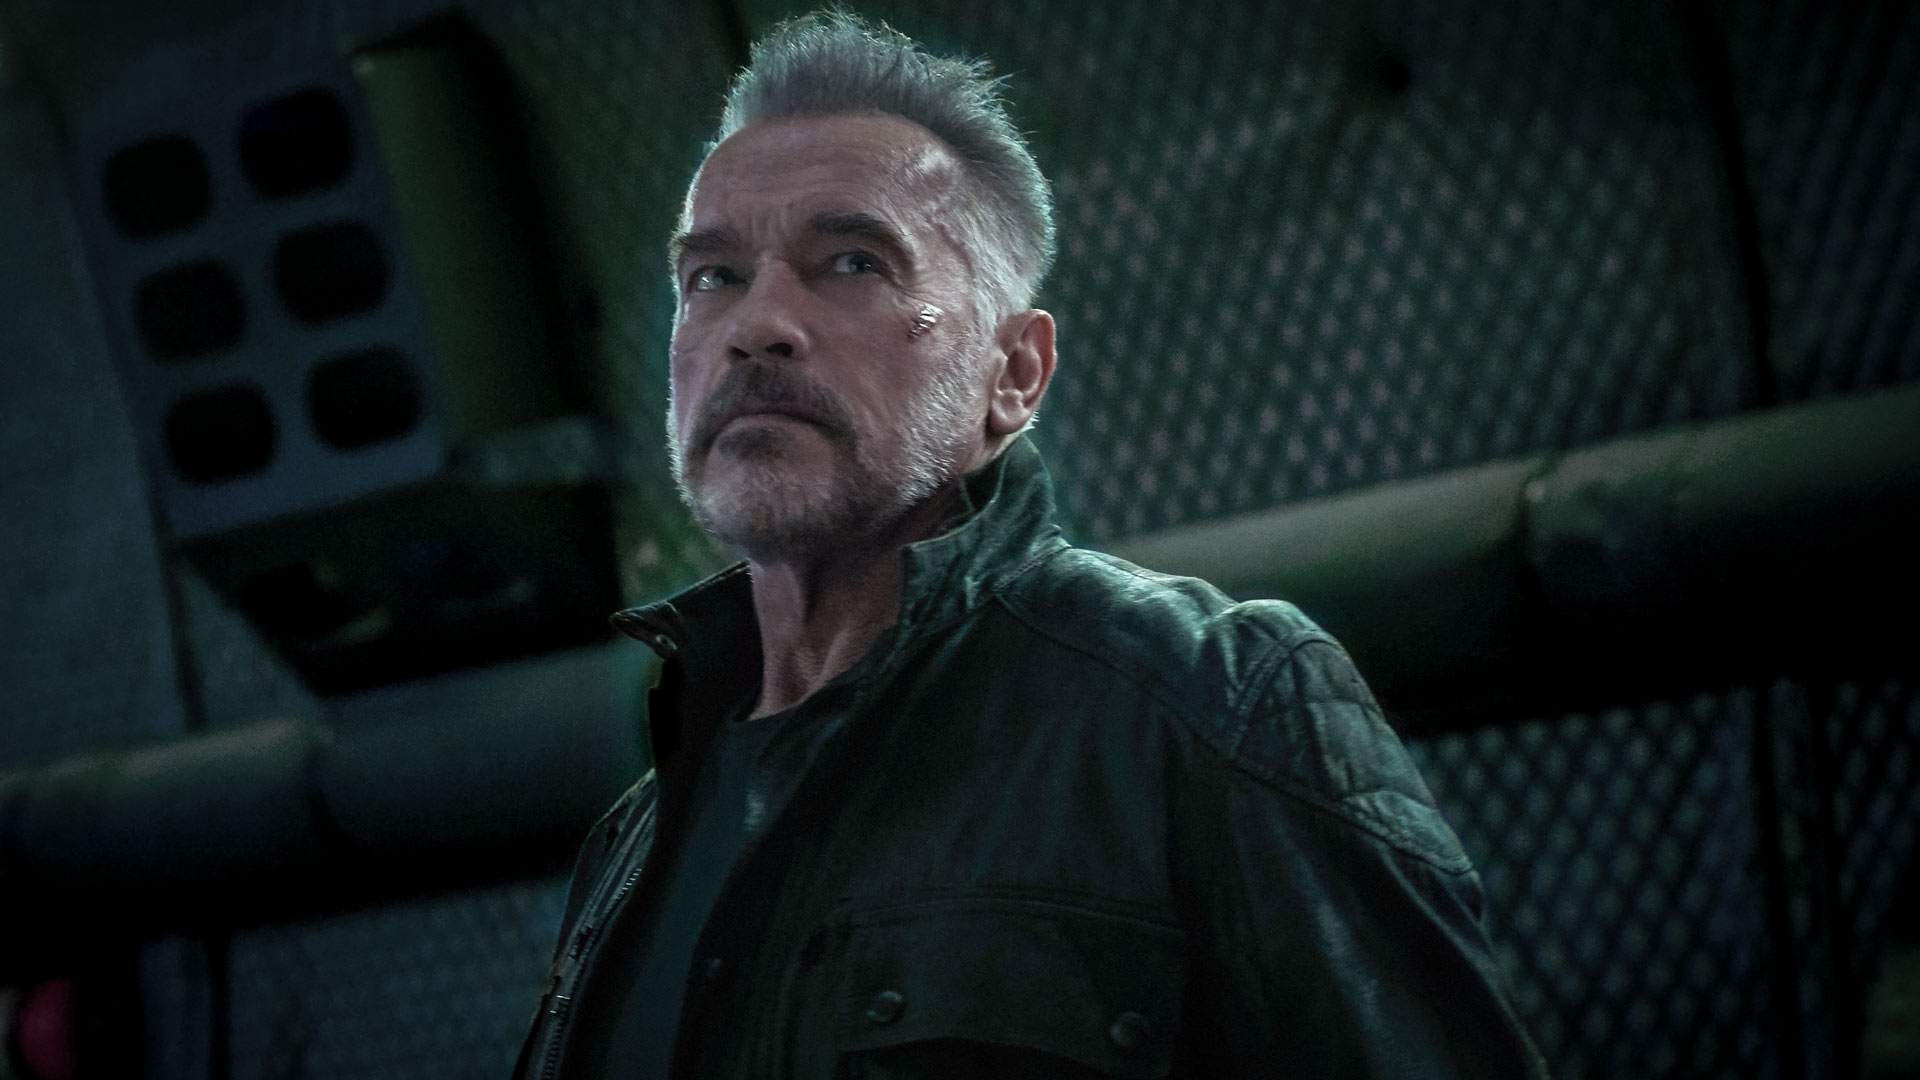 Arnold Schwarzenegger Is Back (Again) with the First Teaser for 'Terminator: Dark Fate'